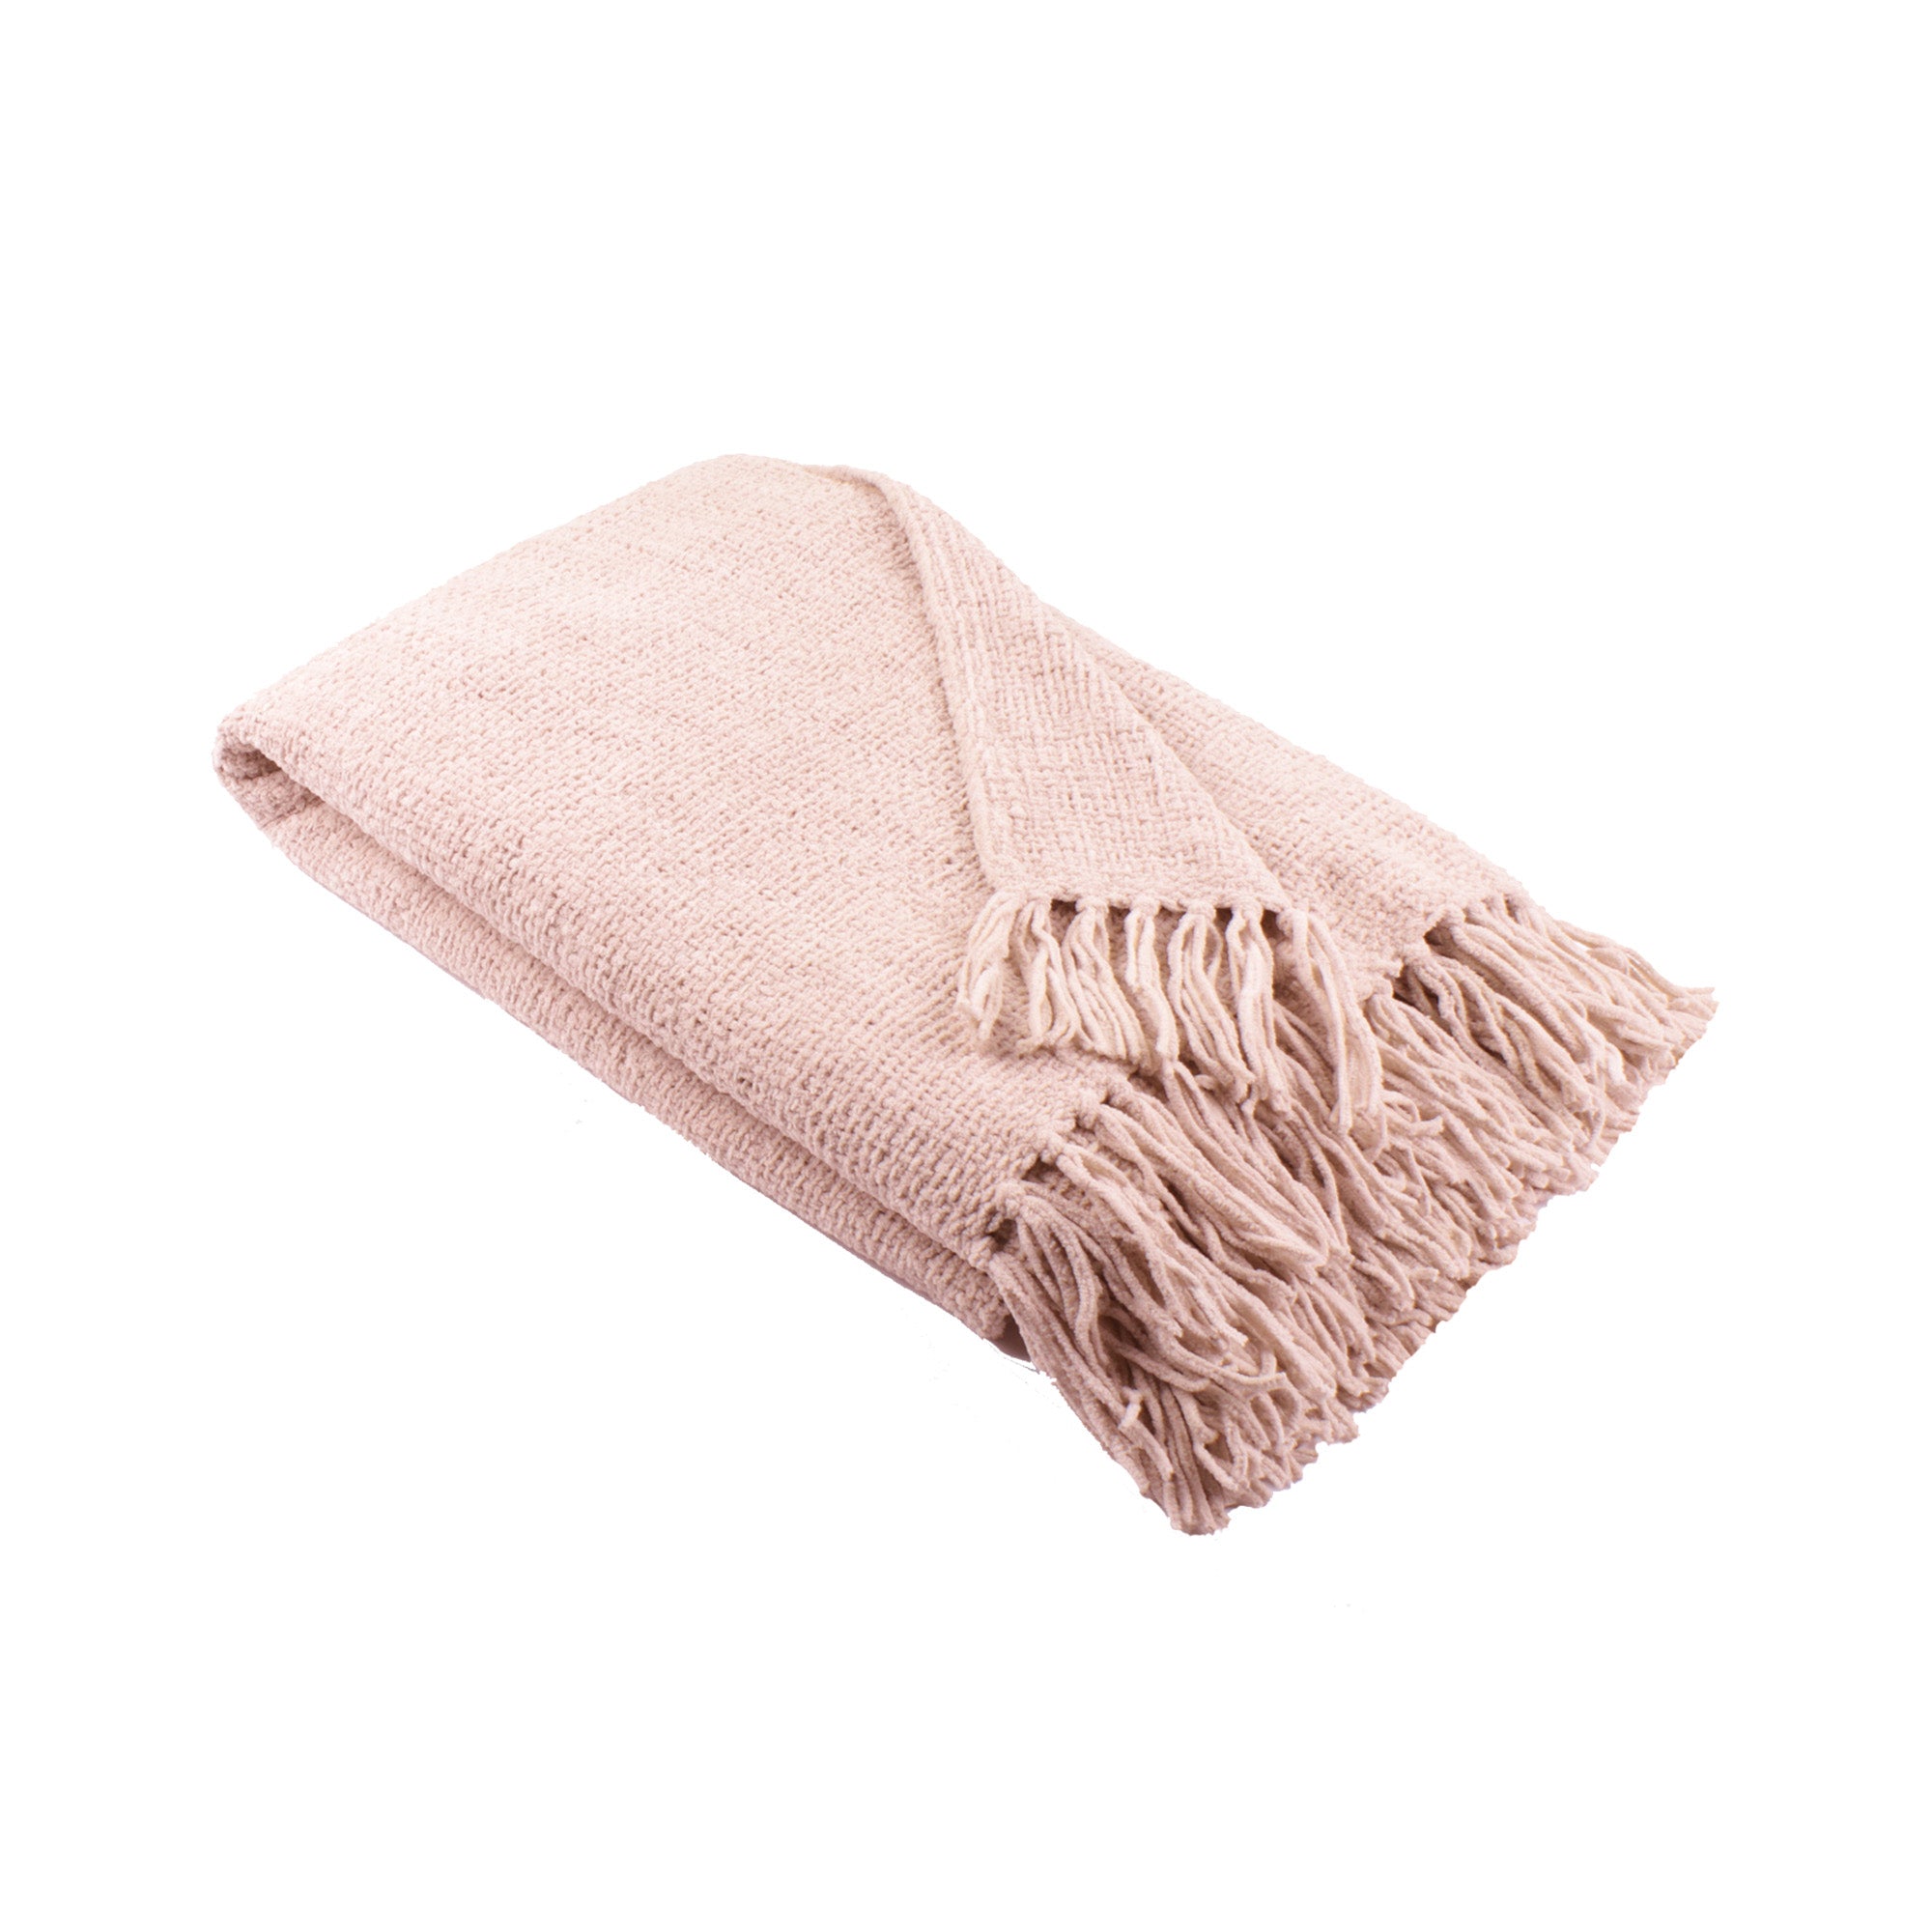 Chenille Throw by Appletree Loft in Natural 130 x 180cm - Throw - Appletree Loft